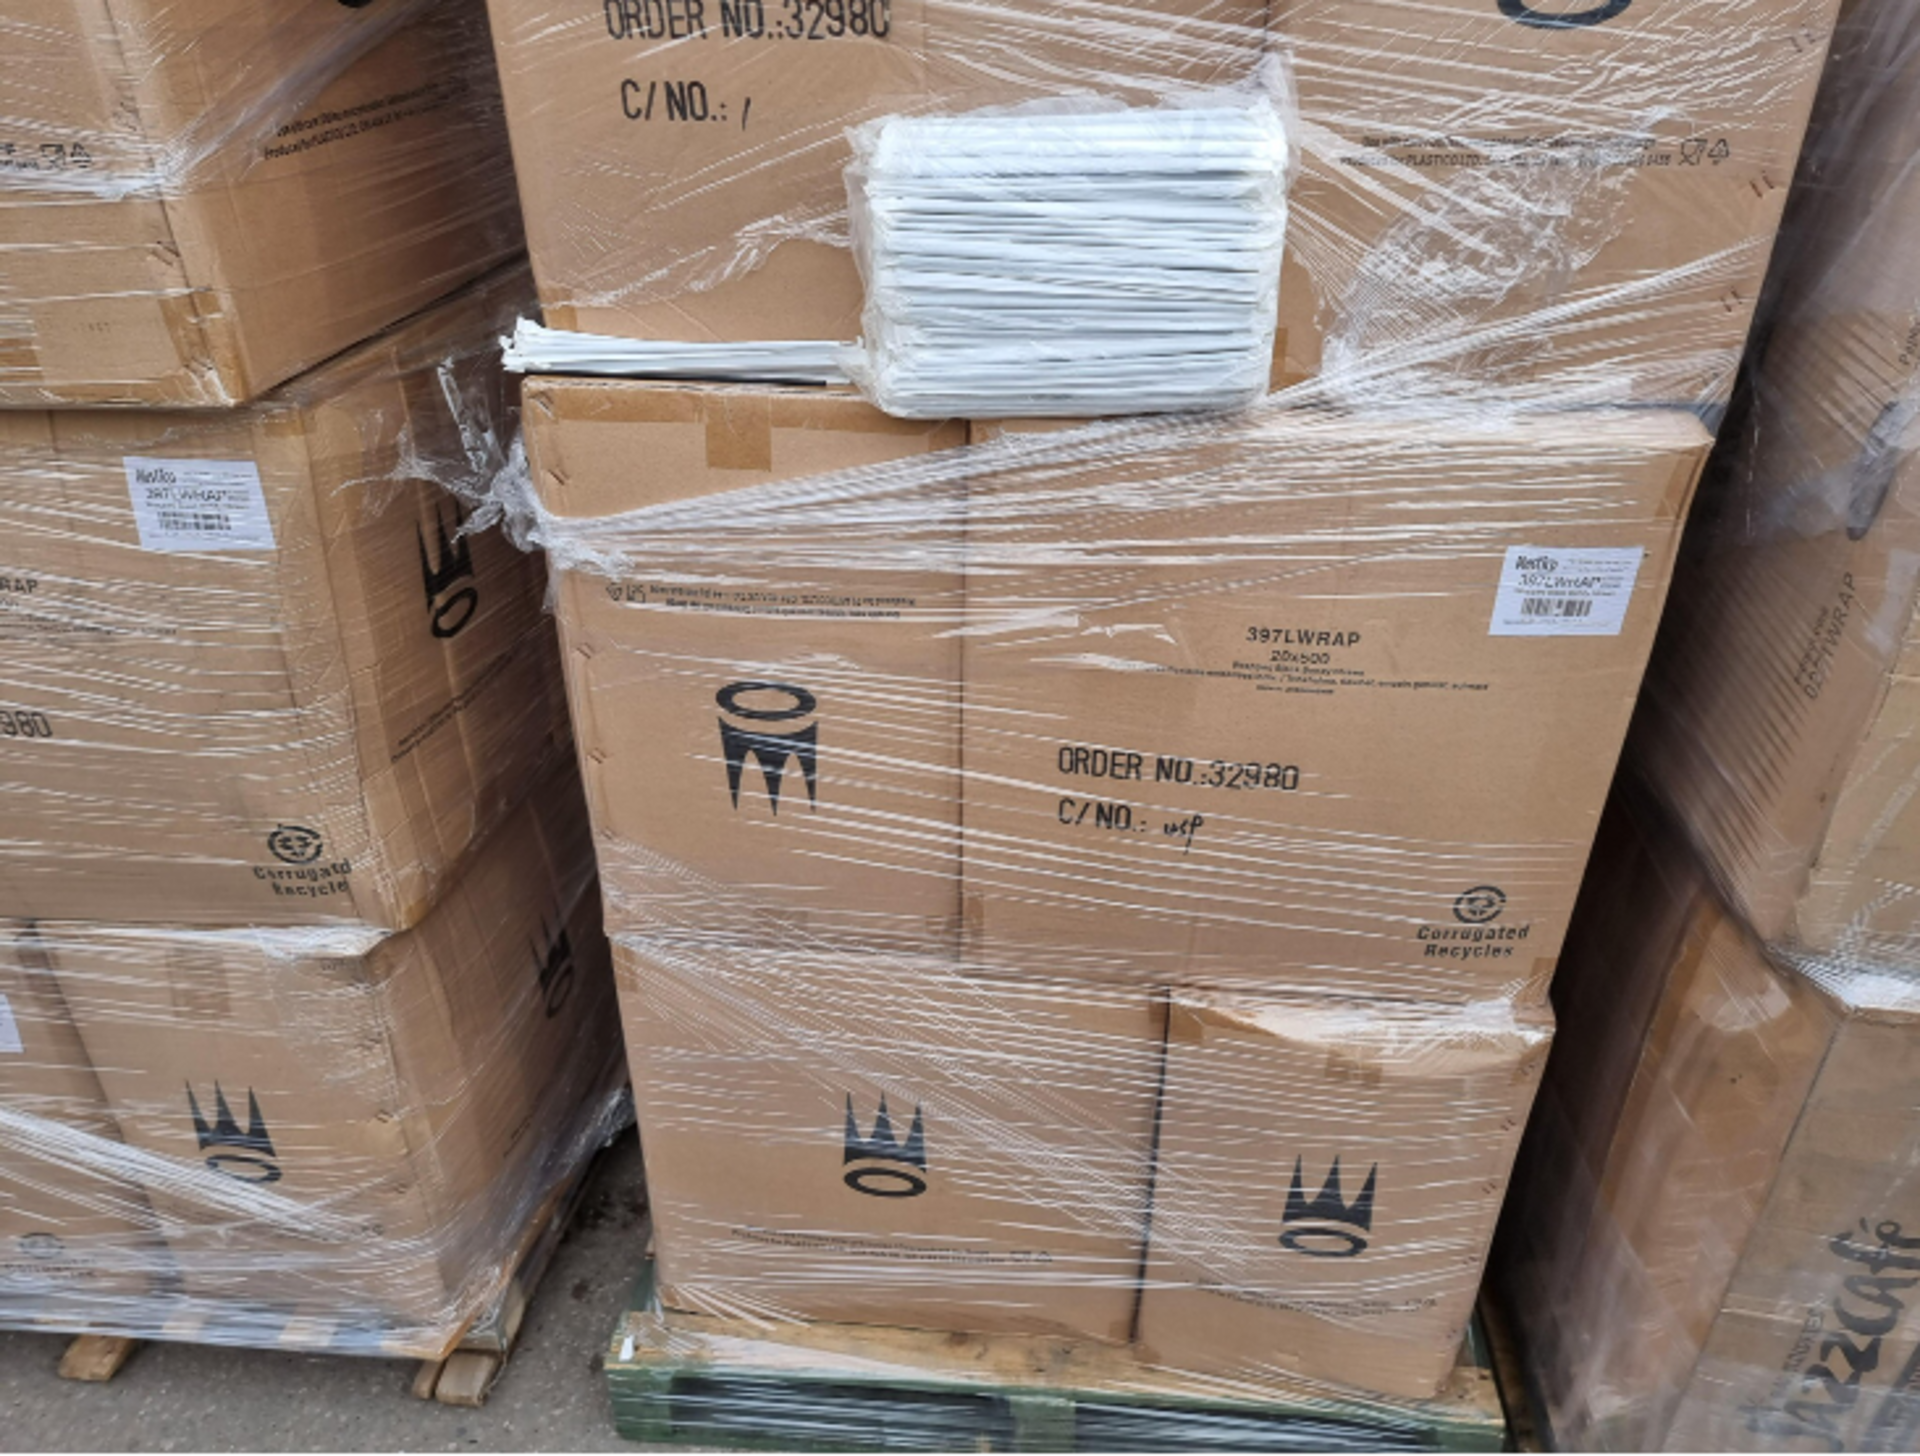 PALLET TO CONTAIN 144 x NEW PACKAGED ICONS EMOJI SOFT PLUSH CUSHIONS - Image 3 of 3